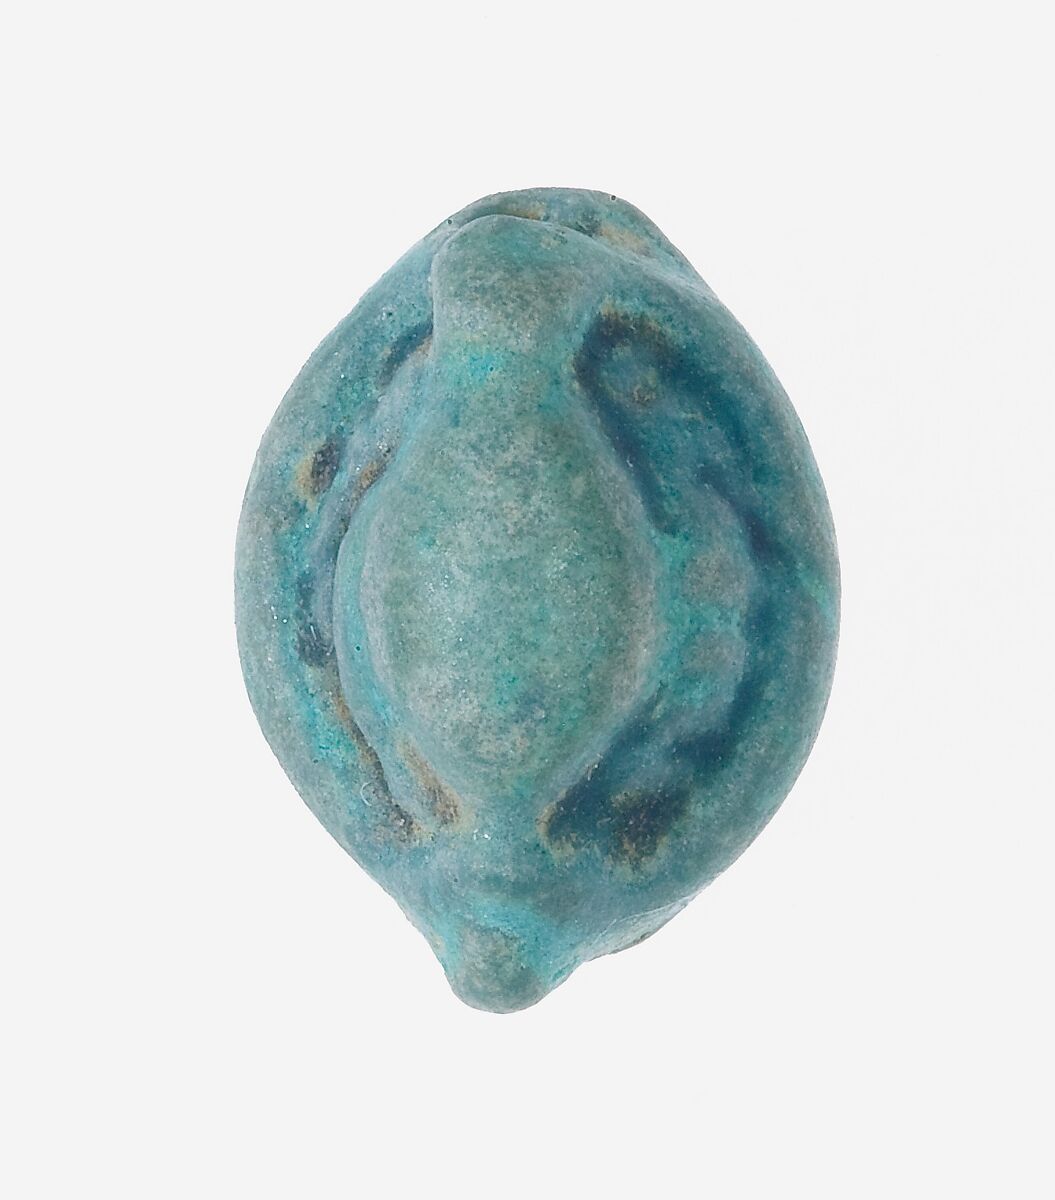 Seal Amulet in the Shape of a Cowry Shell, Faience 